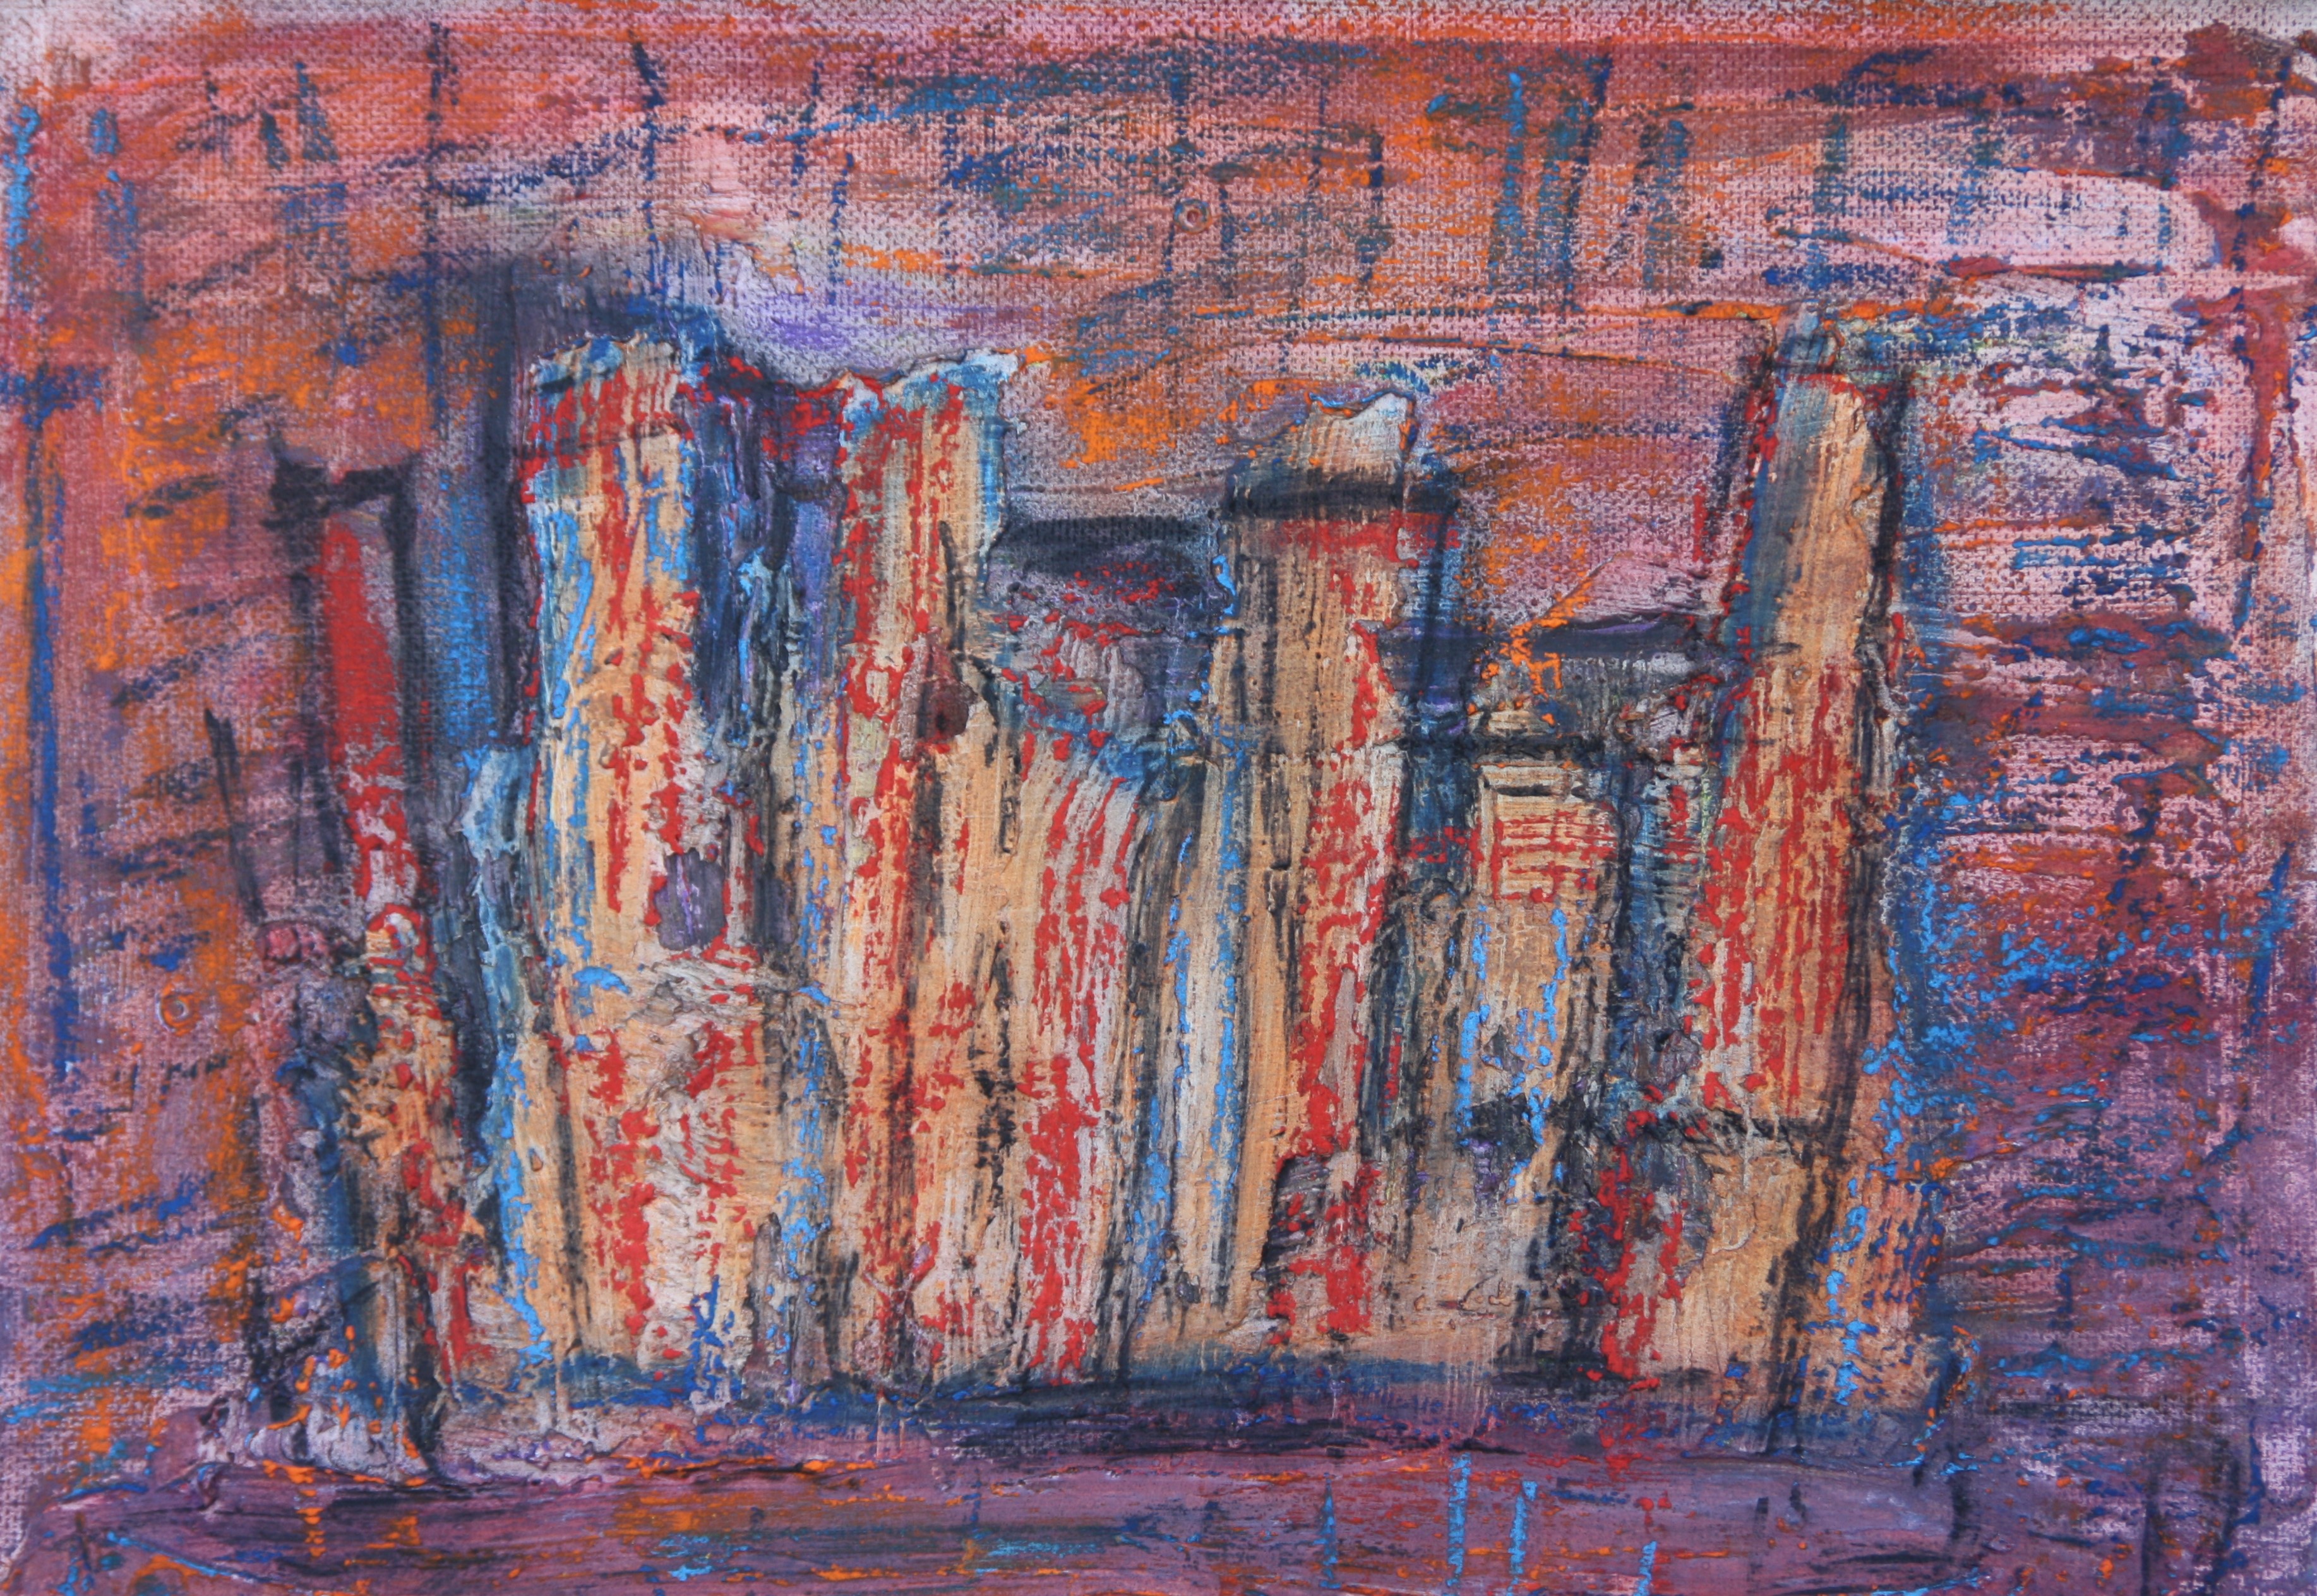 The uprising city 122 x 65 2013 mixed media on board